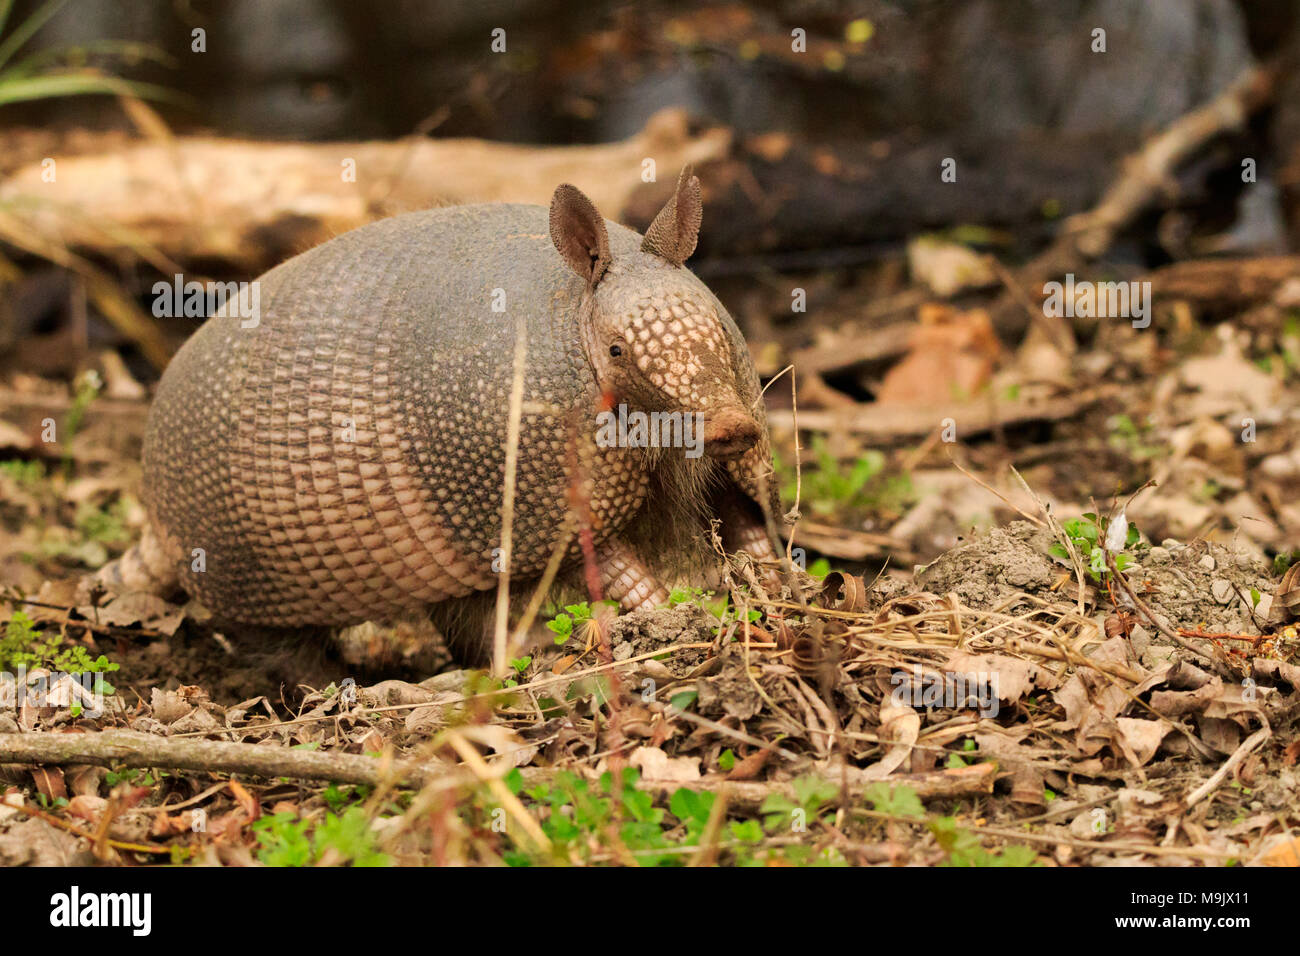 An Armadillo looks up after rooting in the dirt at the Sequoyah National Wildlife Refuge located in Vian Oklahoma 2018 Stock Photo